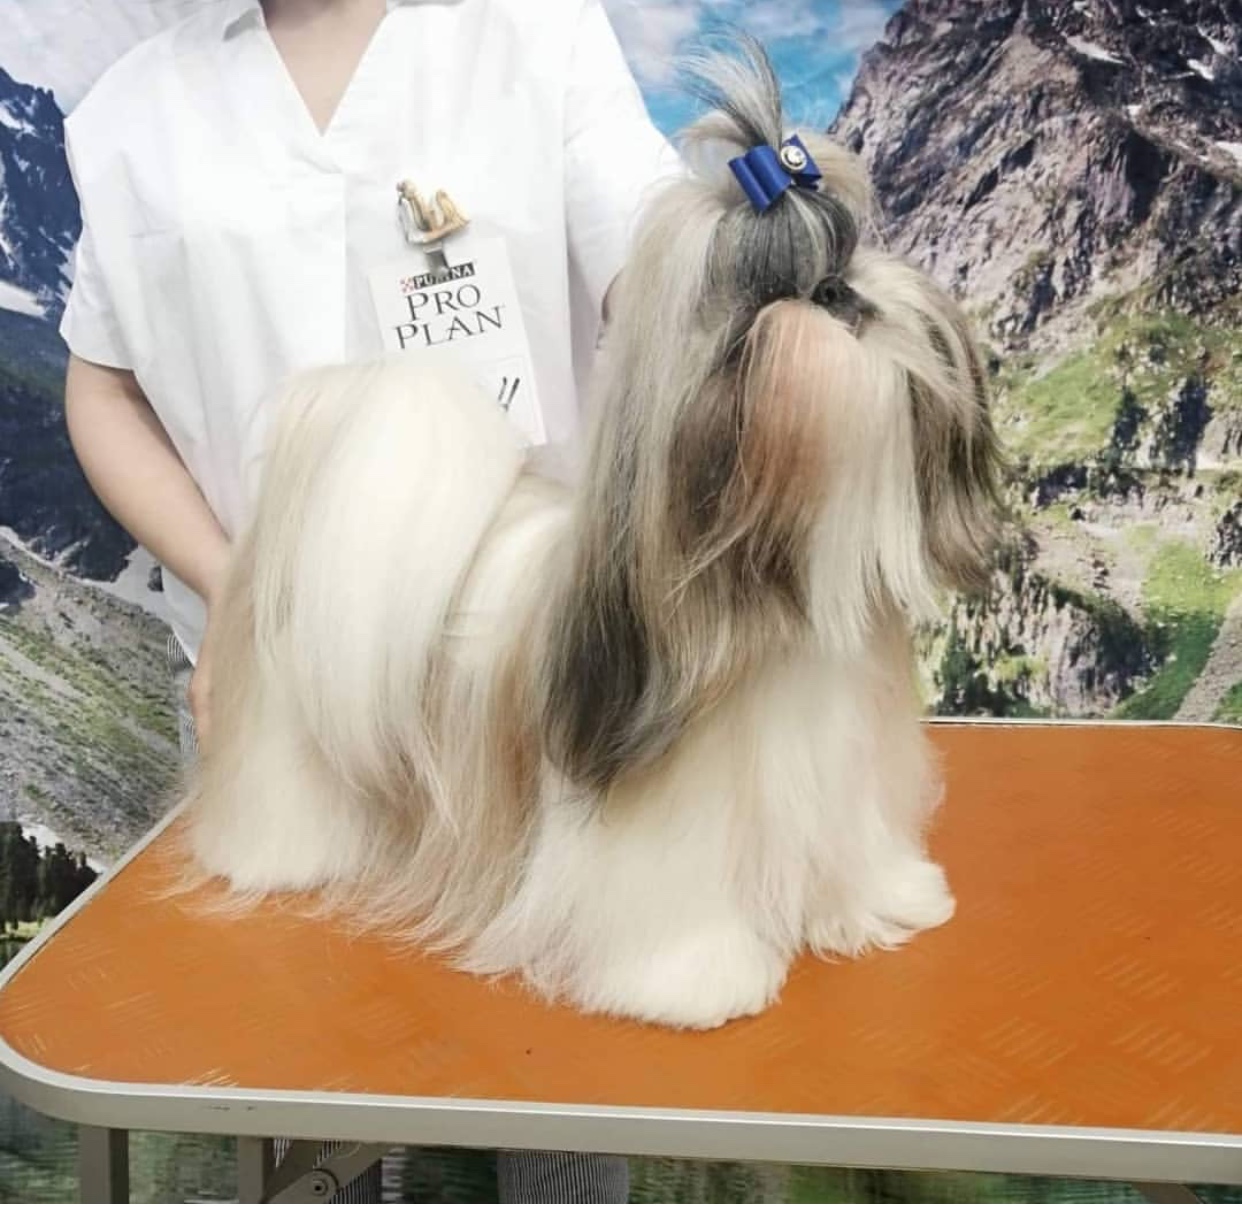 A Shih Tzu with long fur standing on top of the grooming table